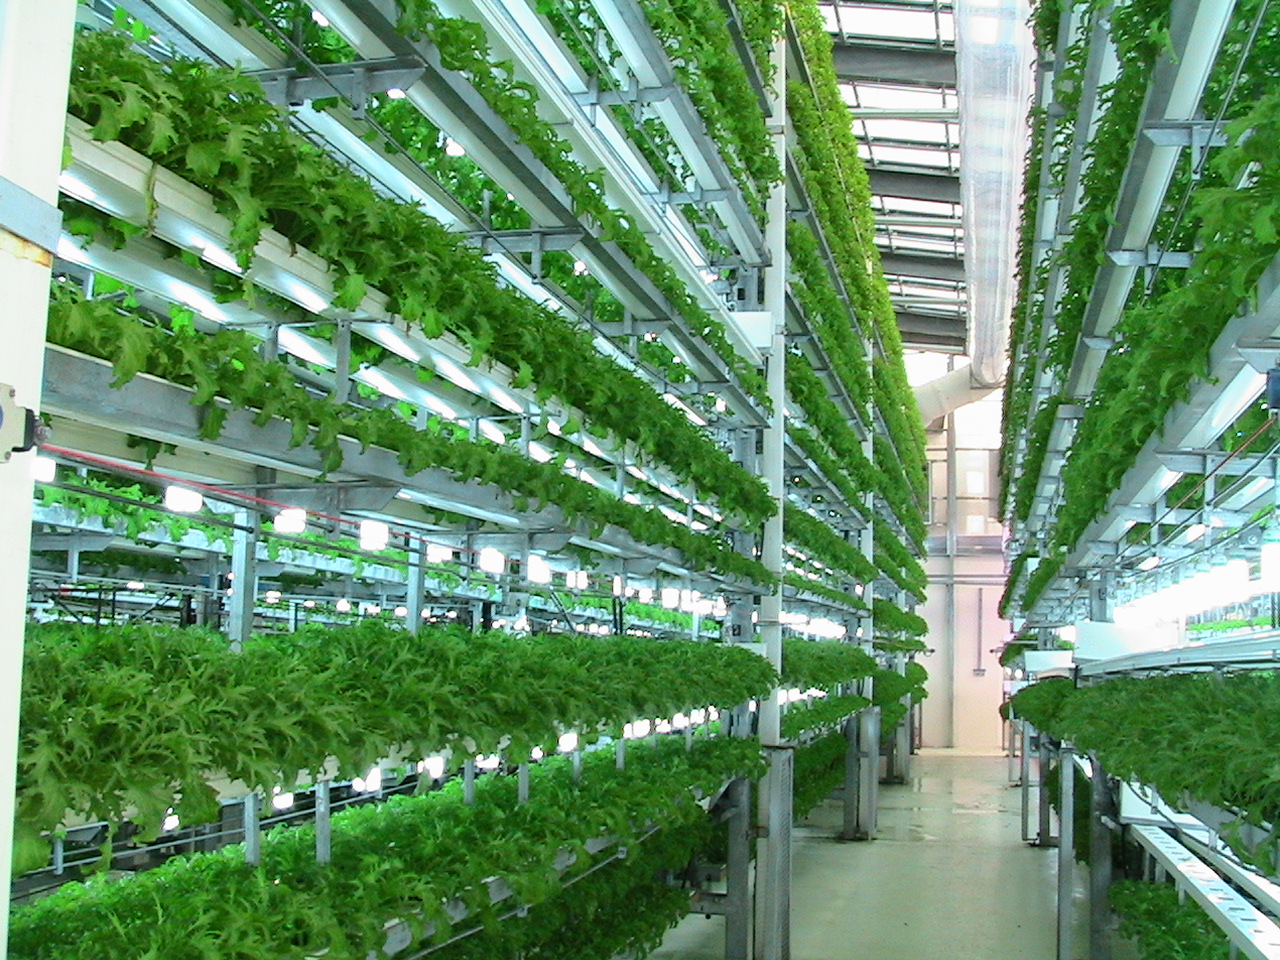 ... and Hydroponics: Growing Salad Vegetables in Aquaponic Systems